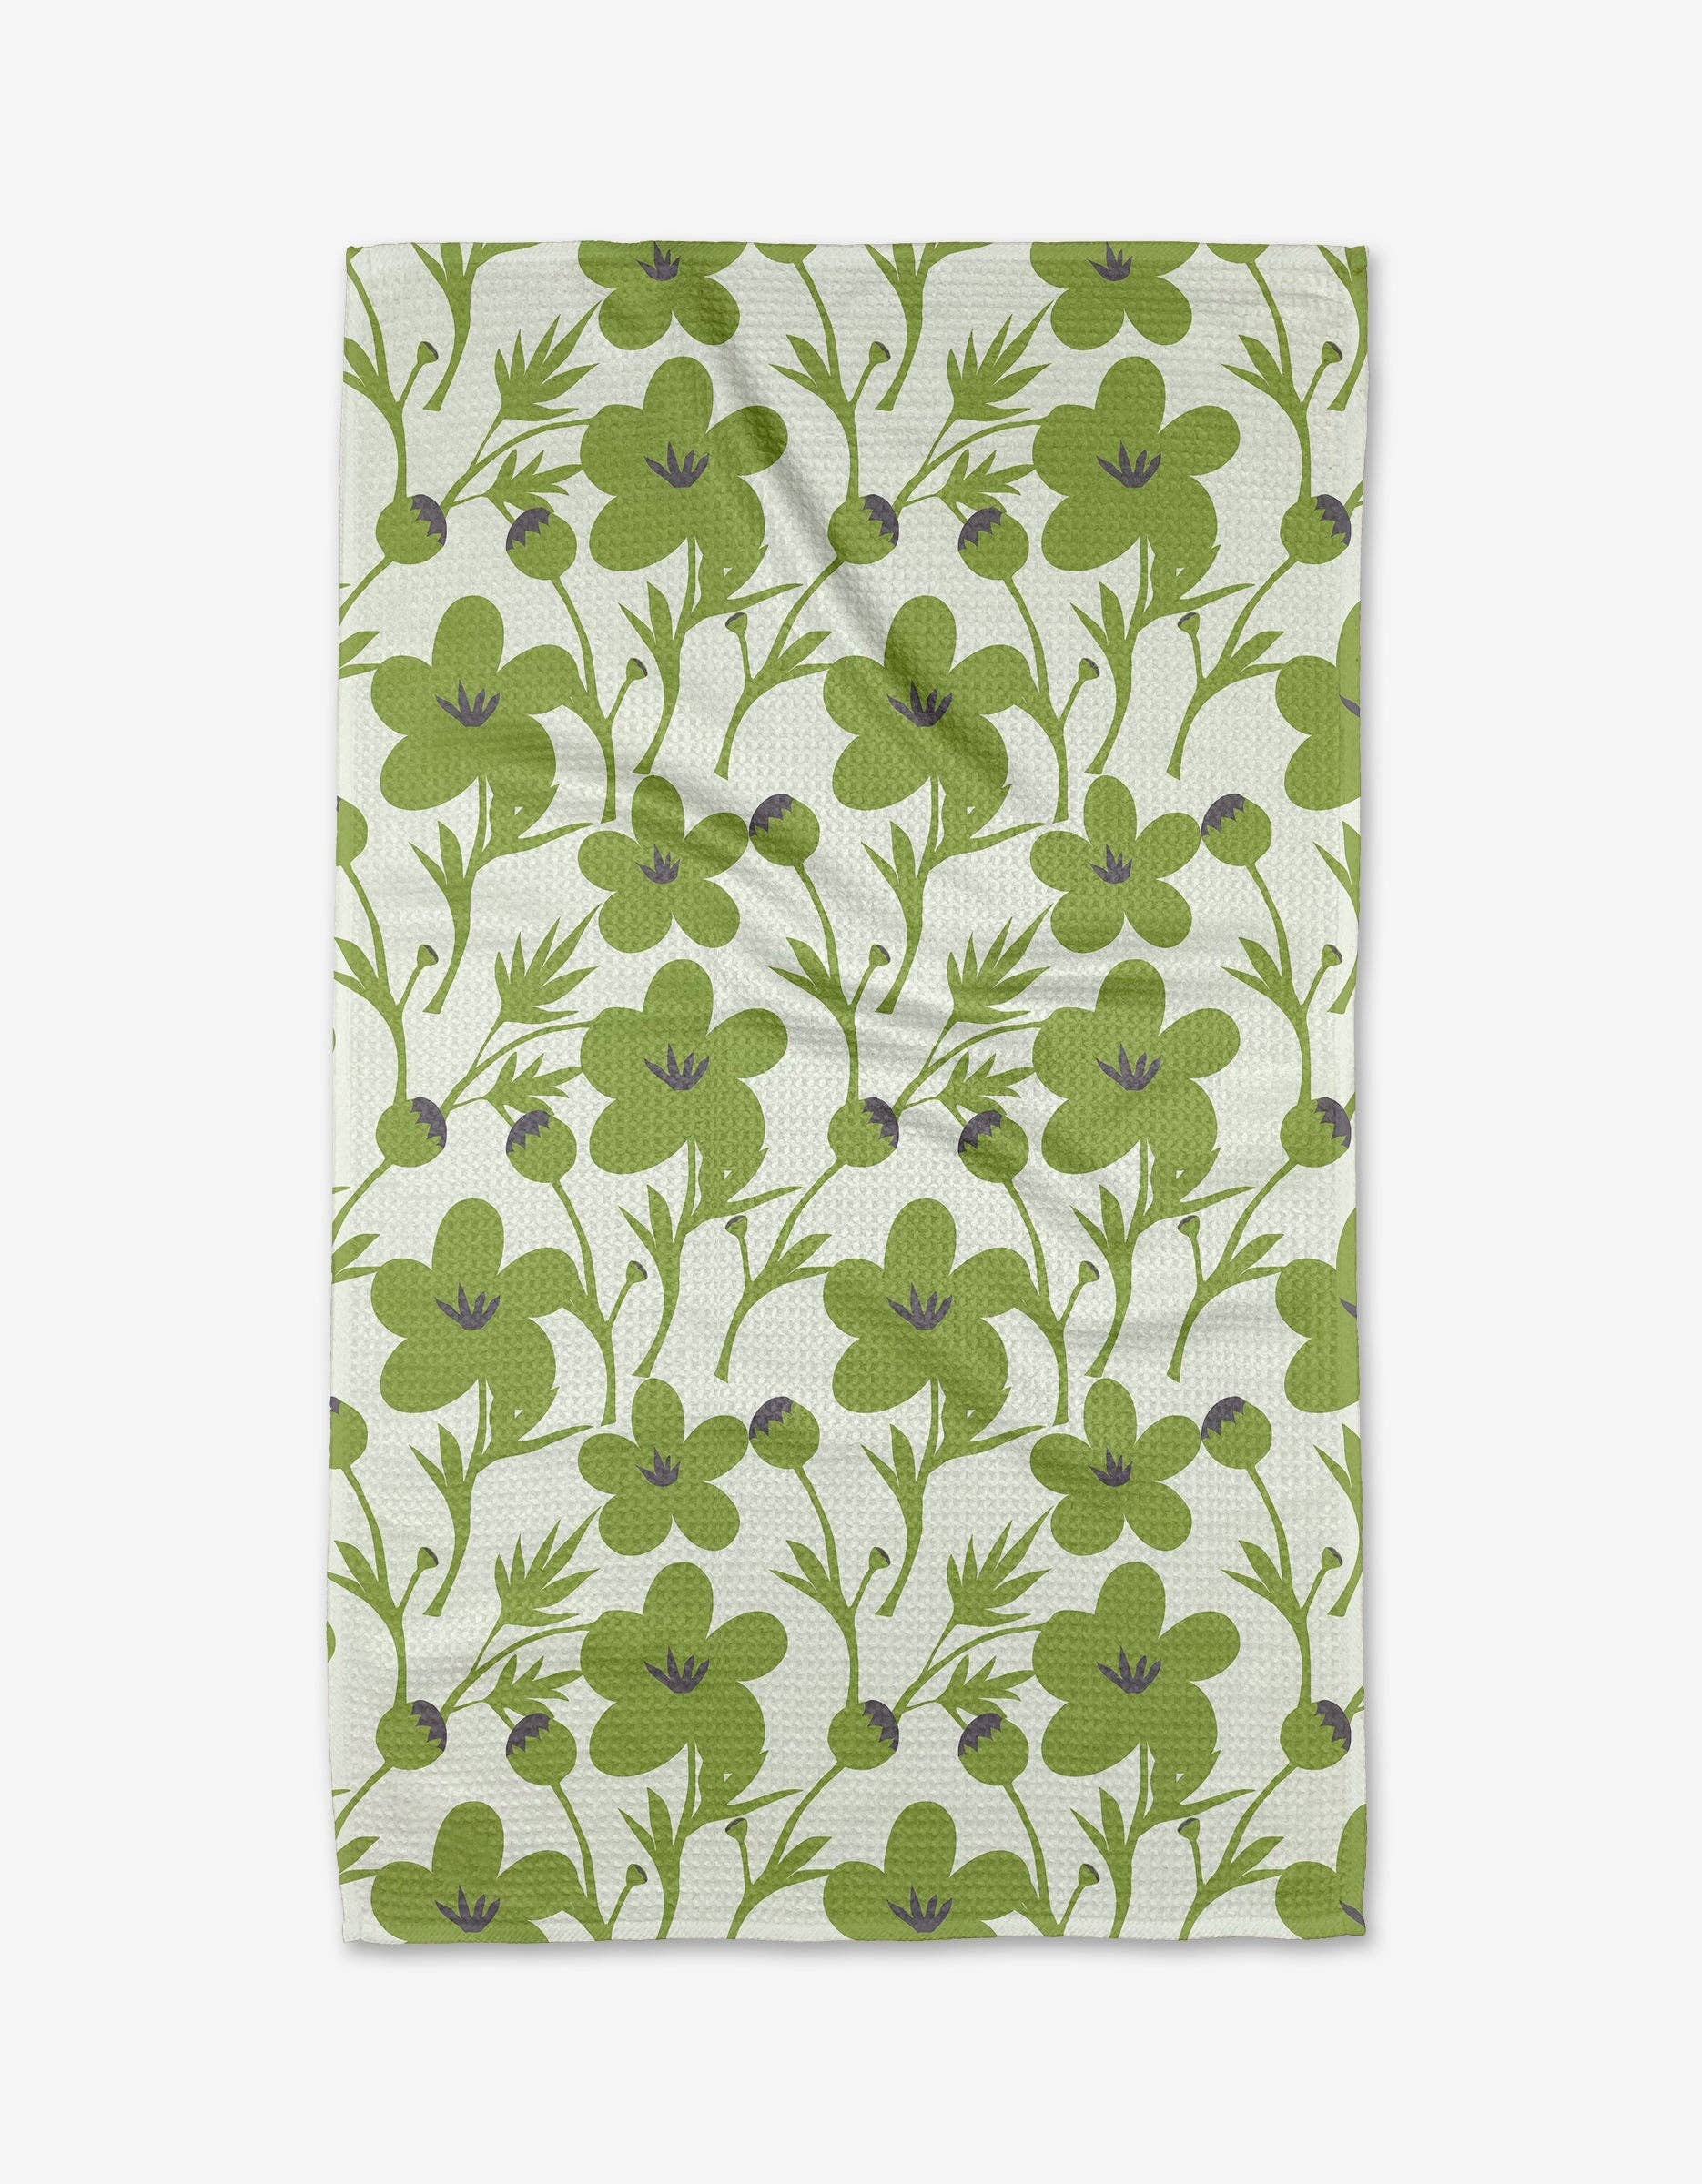 Blooming Blossoms Tea Towel - The Preppy Bunny